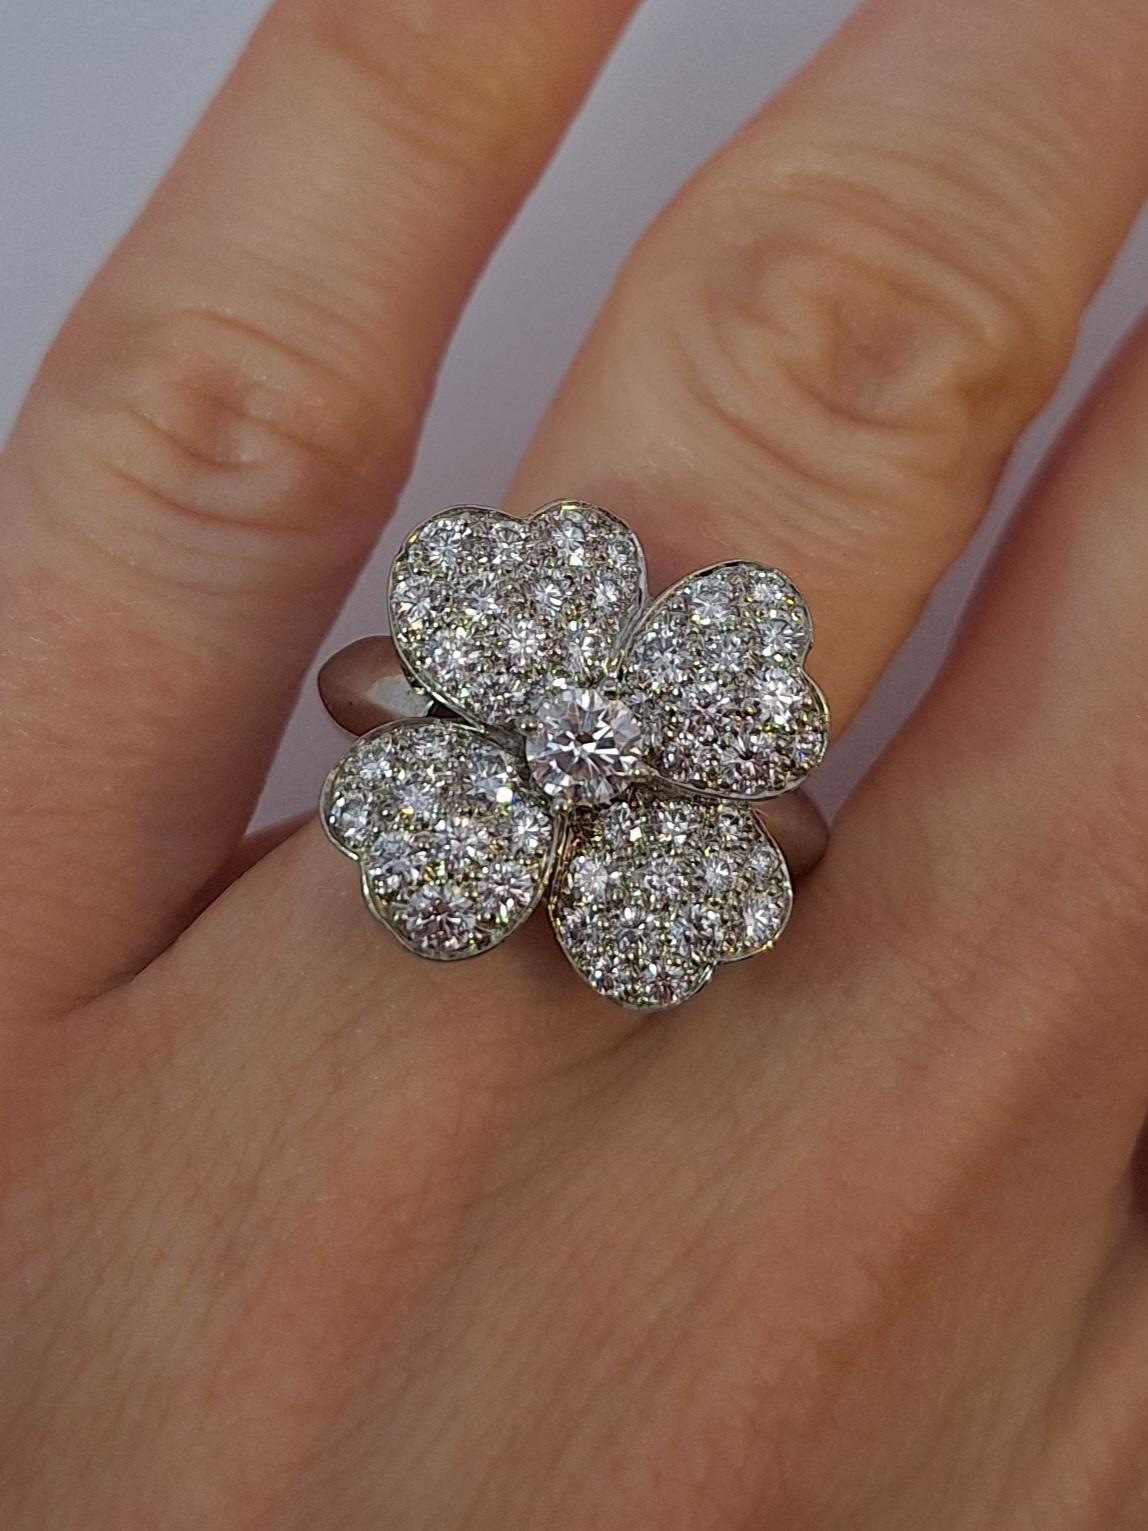 Van Cleef Cosmos Diamond Ring Medium Size In Excellent Condition For Sale In New York, NY